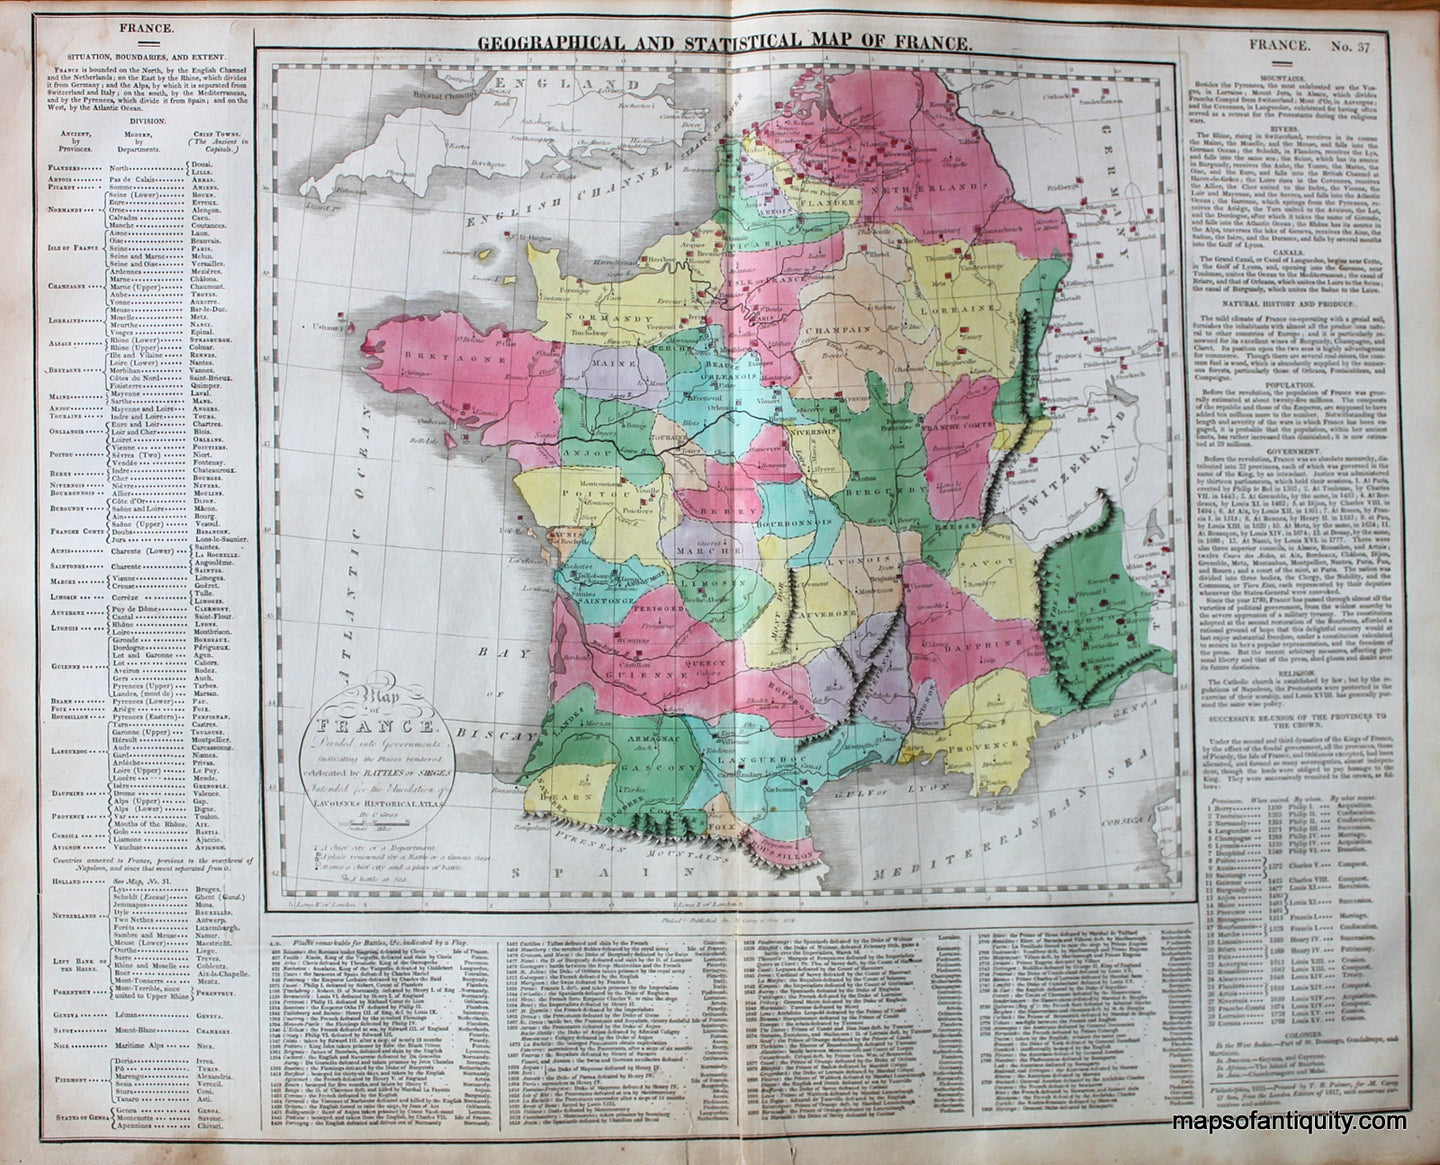 Antique-Hand-Colored-Map-Geographical-and-Statistical-Map-of-France.-No.-37-Europe-France-1821-Lavoisne-Maps-Of-Antiquity